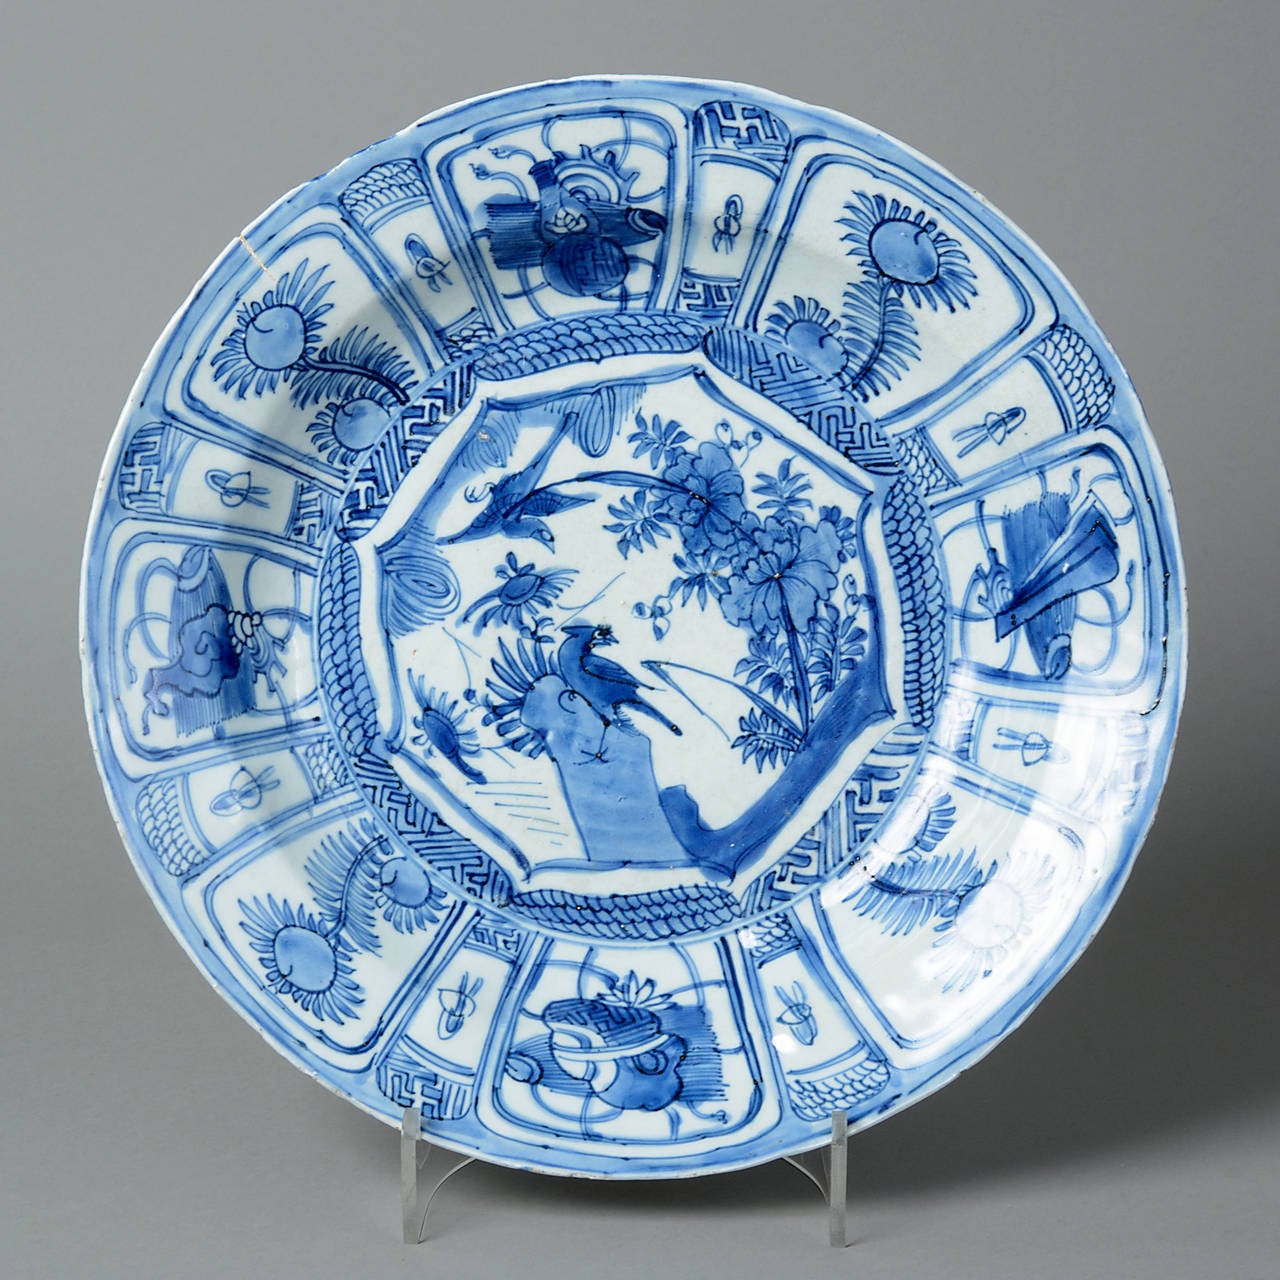 An early 17th century blue and white porcelain Kraakware charger.

Using a technique perfected during the Ming dynasty, Kraak porcelain was often painted using a glazed cobalt blue. Underglazing is a method of applying the pigment to the ceramic